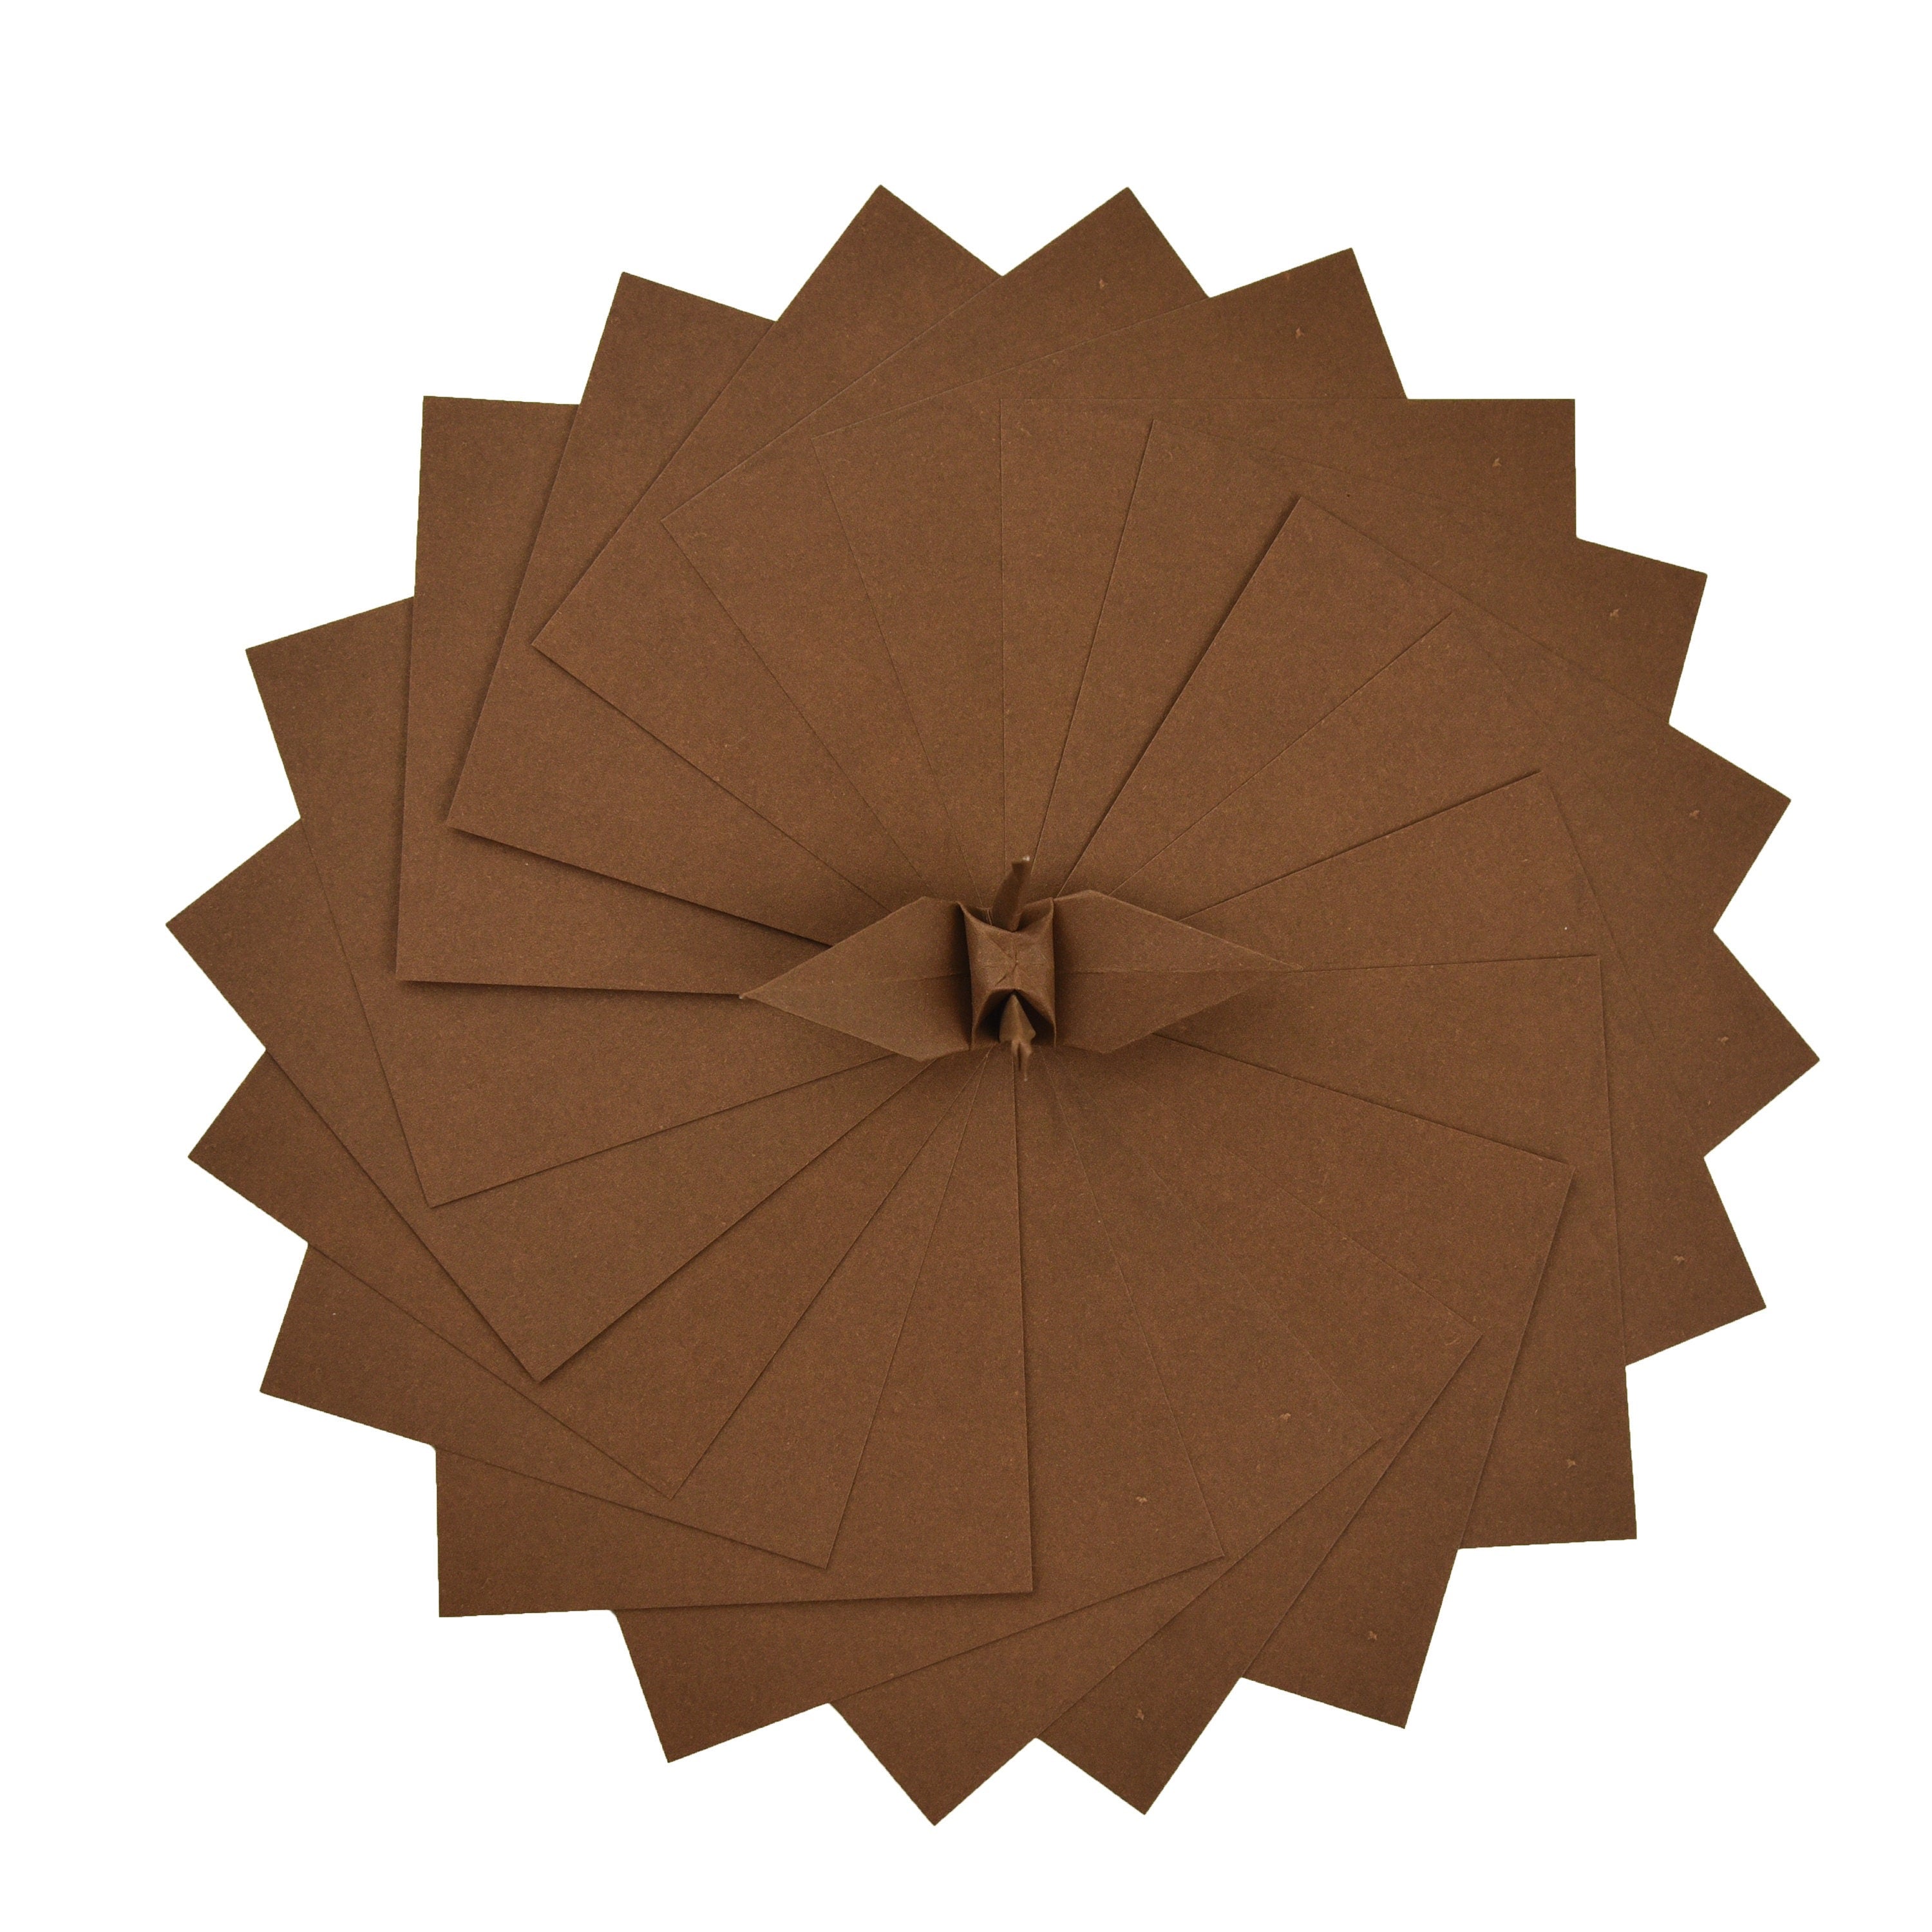 100 Brown Origami Paper Sheets 6x6 inches Square Paper Pack for Folding, Origami Cranes, and Decoration - S07